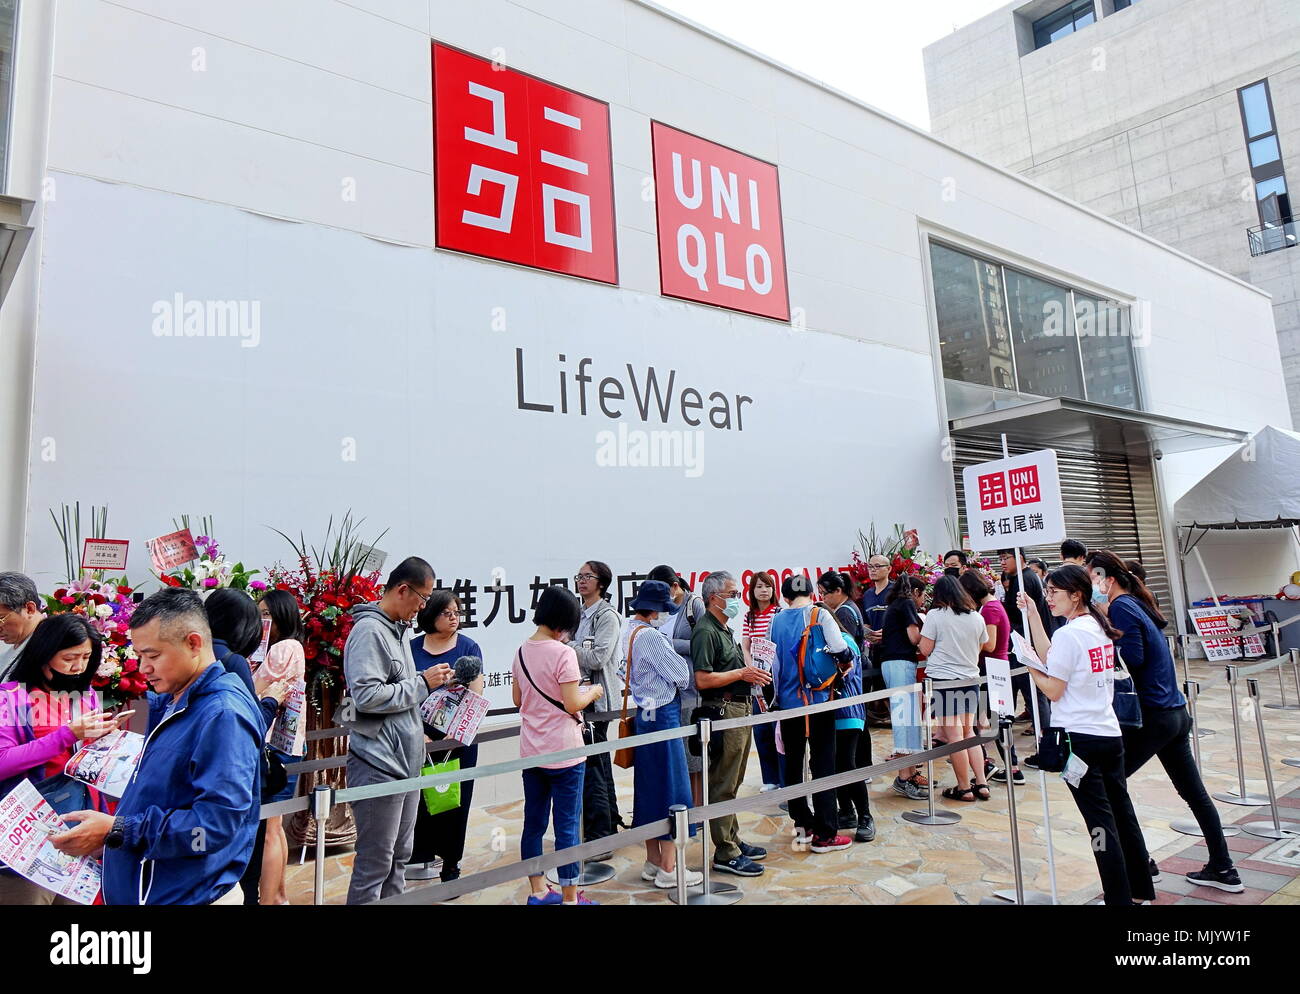 KAOHSIUNG, TAIWAN -- APRIL 20, 2018: People stand in line waiting for the  grand opening of a new clothing store of the Uniqlo brand Stock Photo -  Alamy